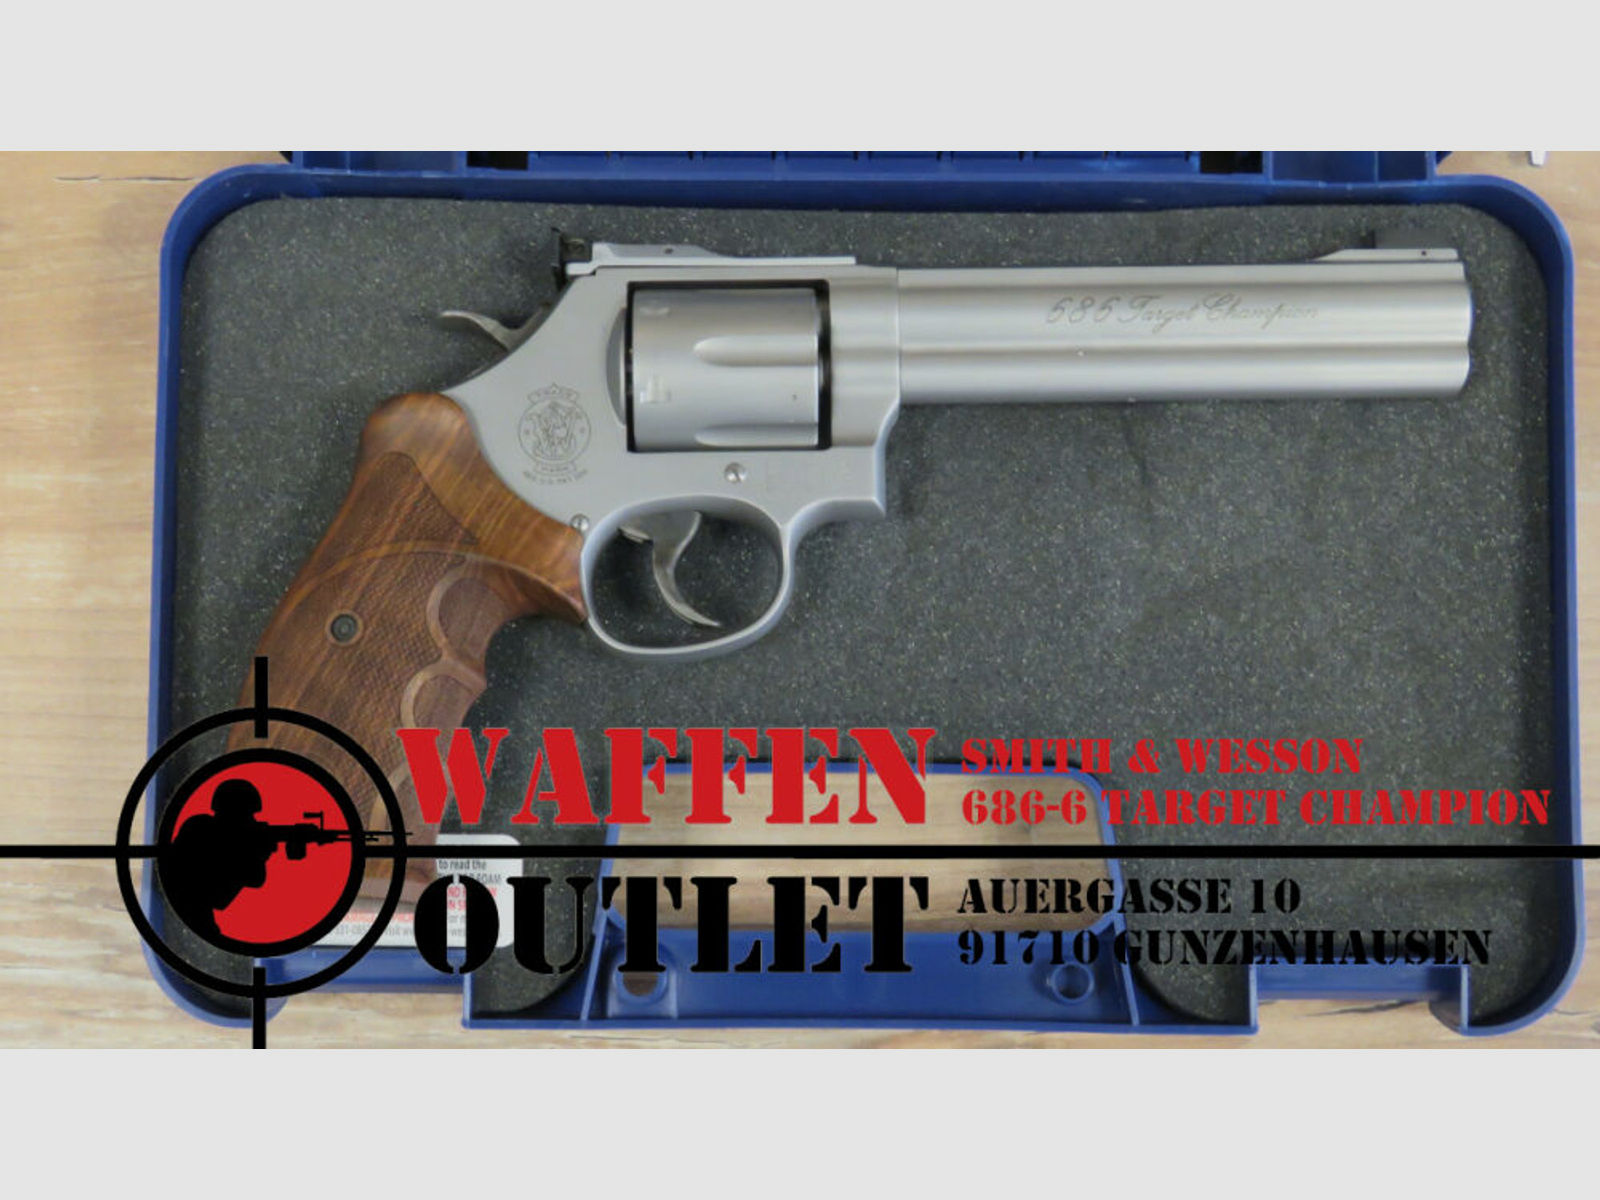 Smith & Wesson	 Model 686-6 Target Champion